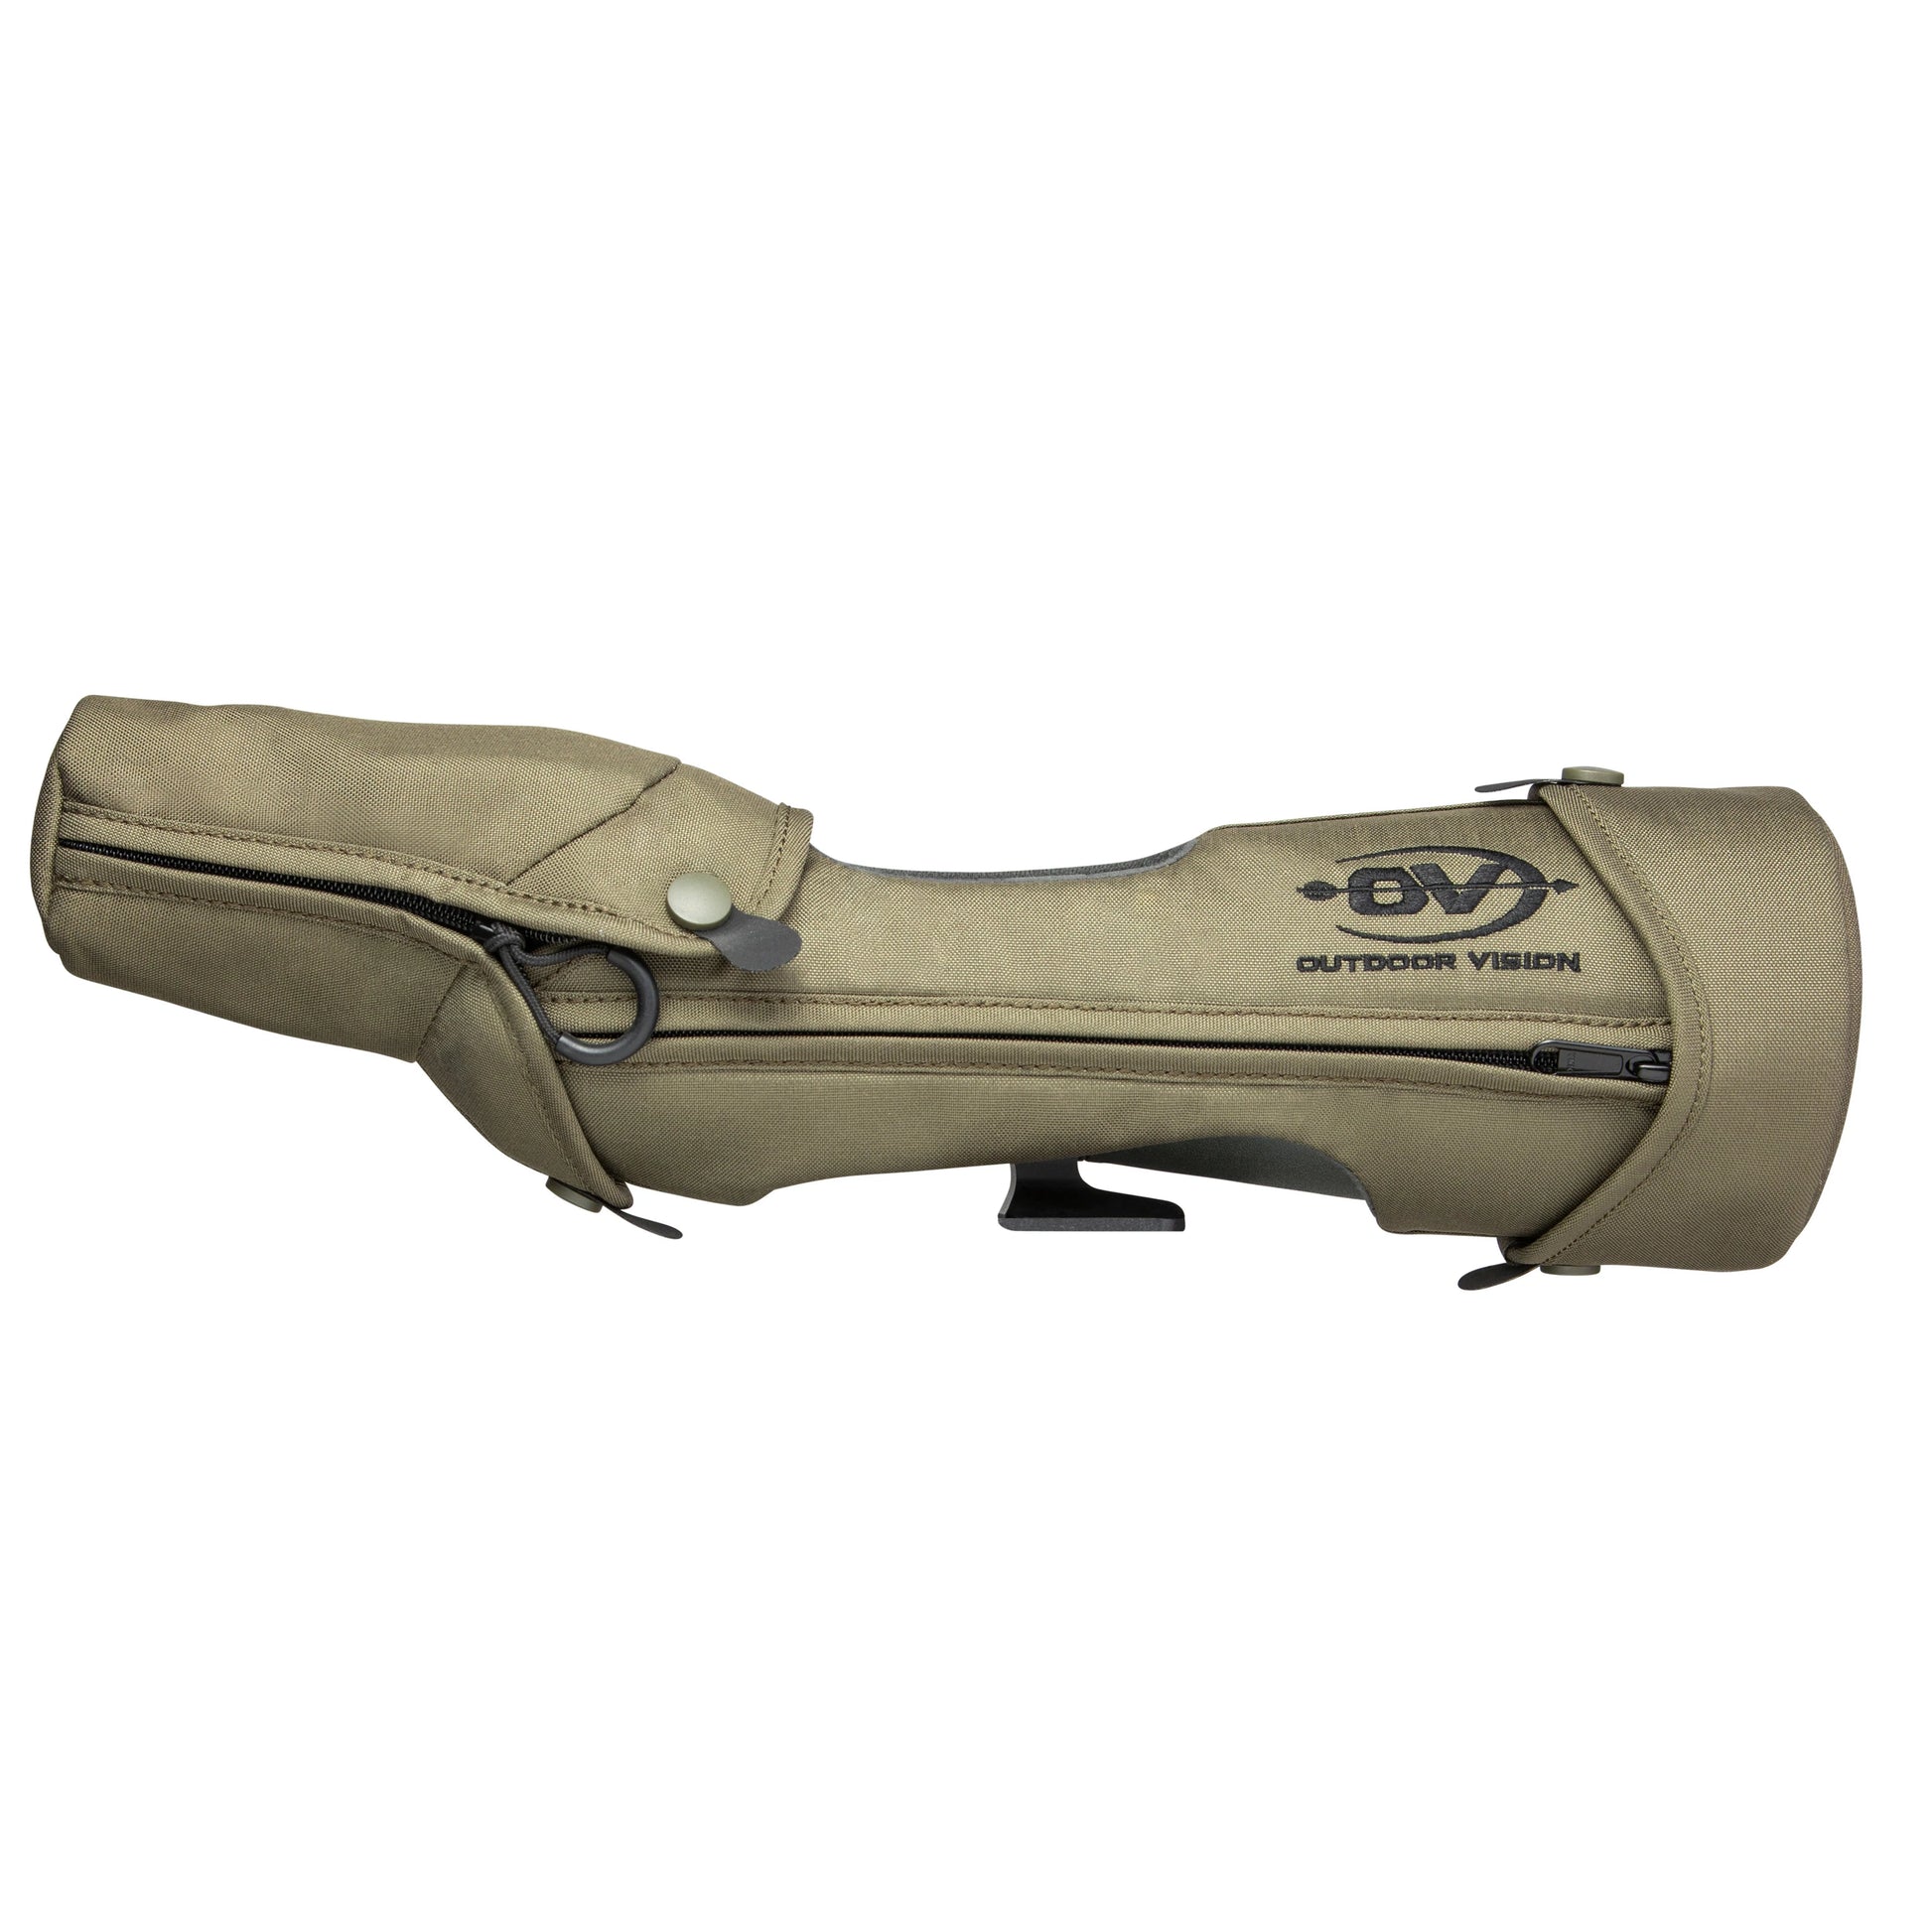 OUTDOOR VISION GEAR - SWAROVSKI STS 80 SPOTTING SCOPE CASE - Shooting Warehouse